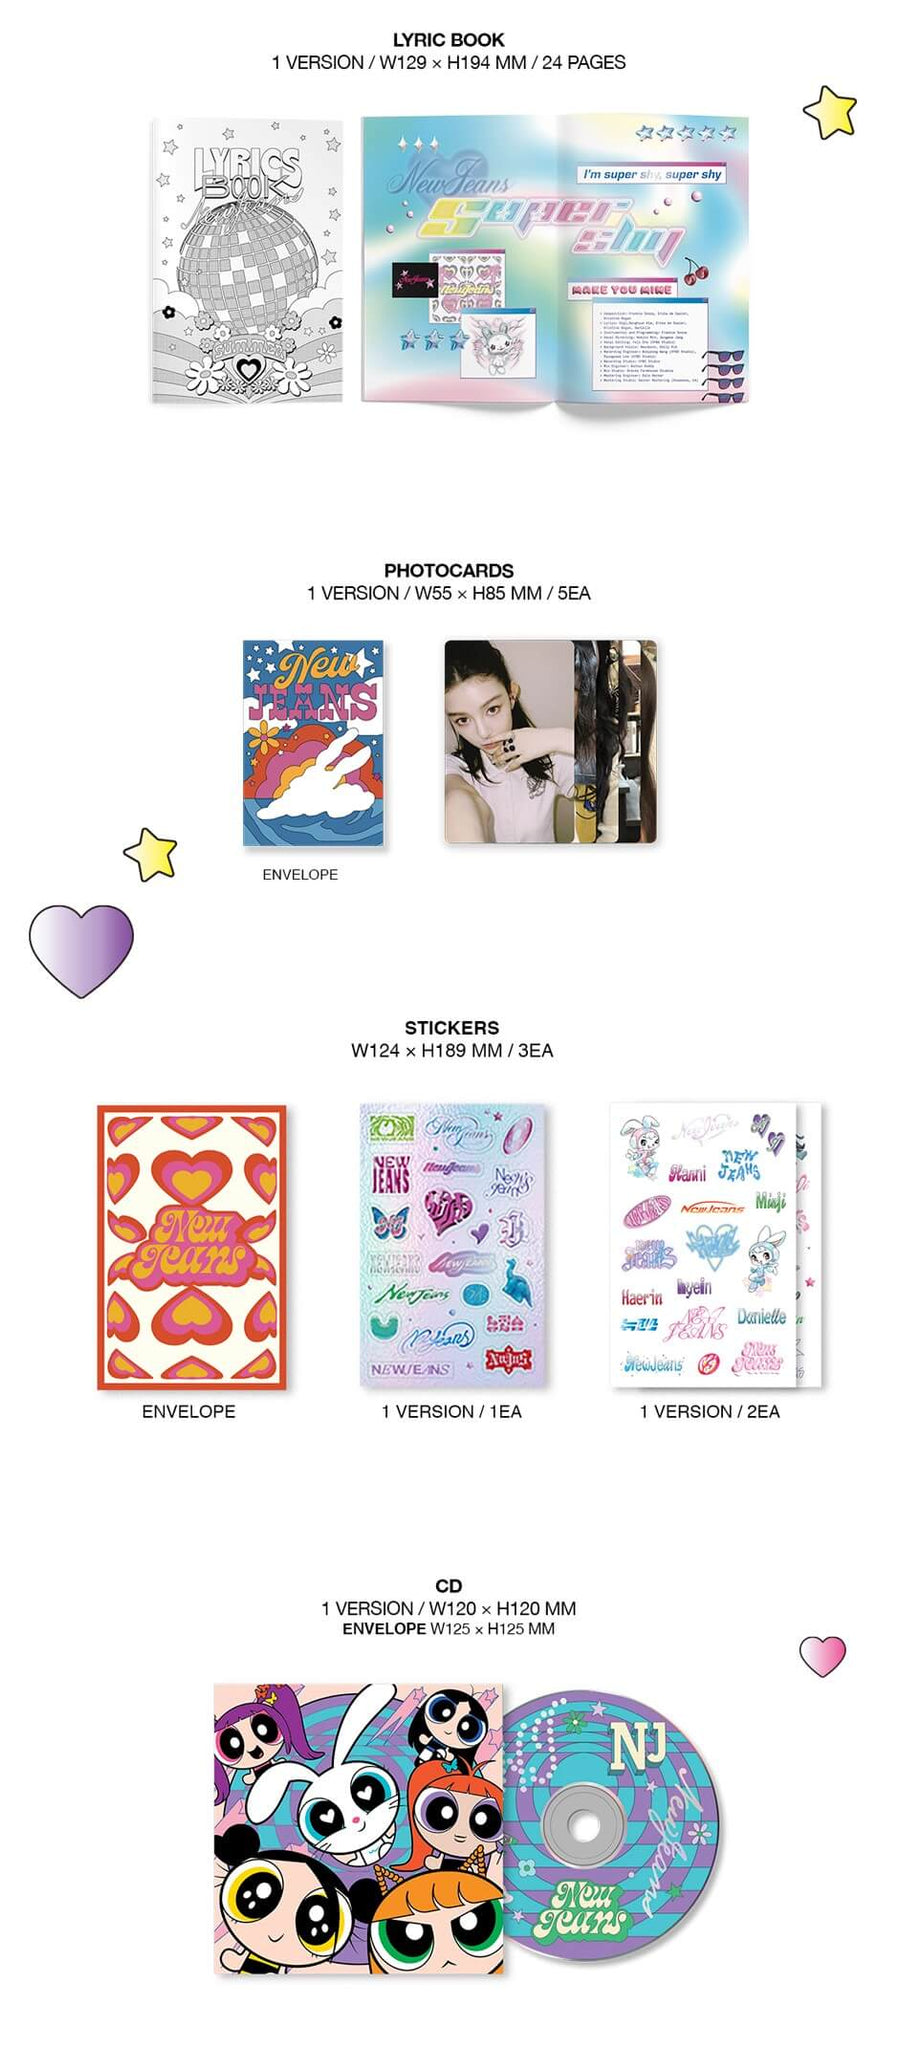 NewJeans Get Up - The POWERPUFF GIRLS X NJ Box Version Inclusions Lyric Book Photocards Stickers CD